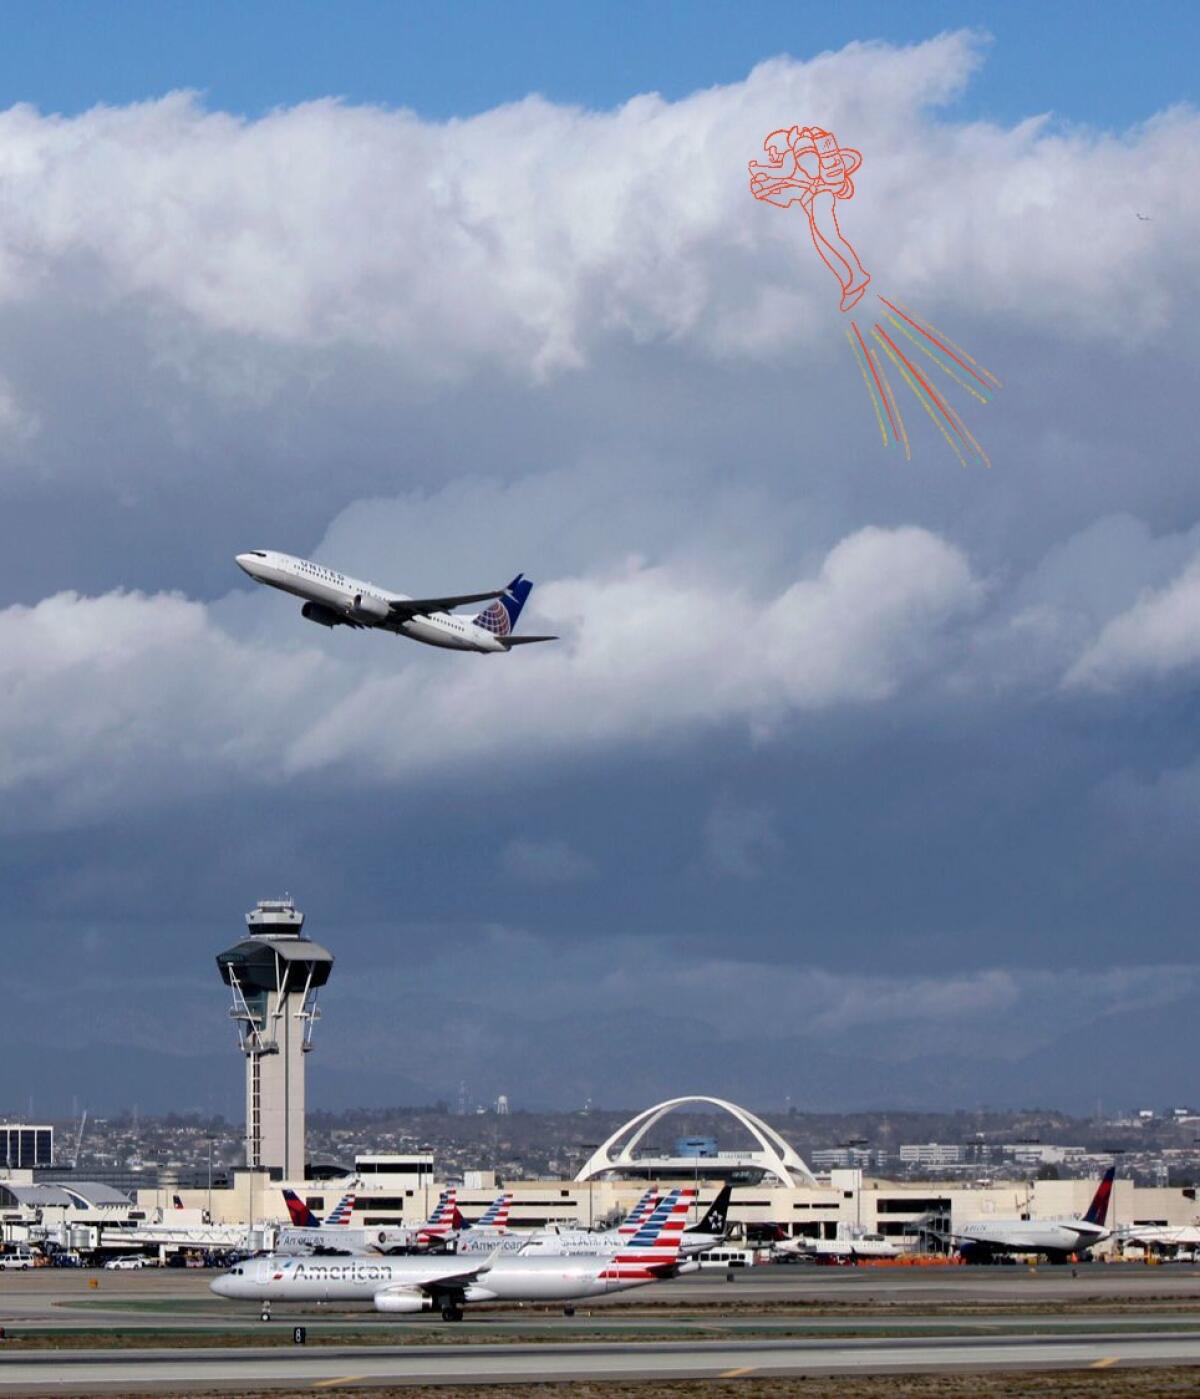 Photograph of an airplane at LAX, with an illustration of a figure in a jet pack.